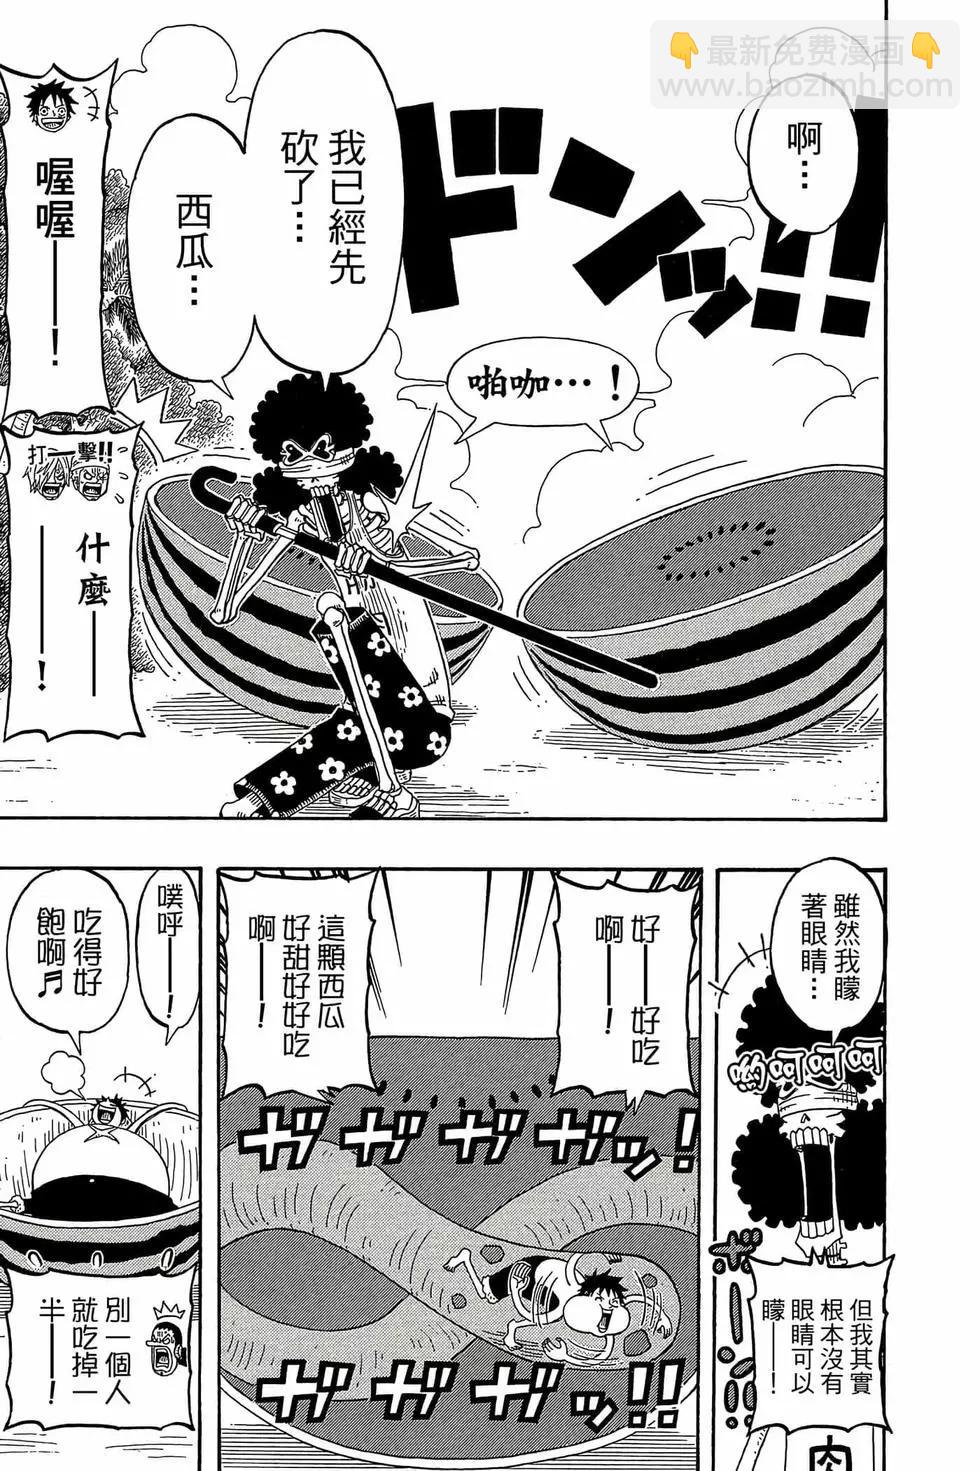 One piece party - 第03卷(3/4) - 6